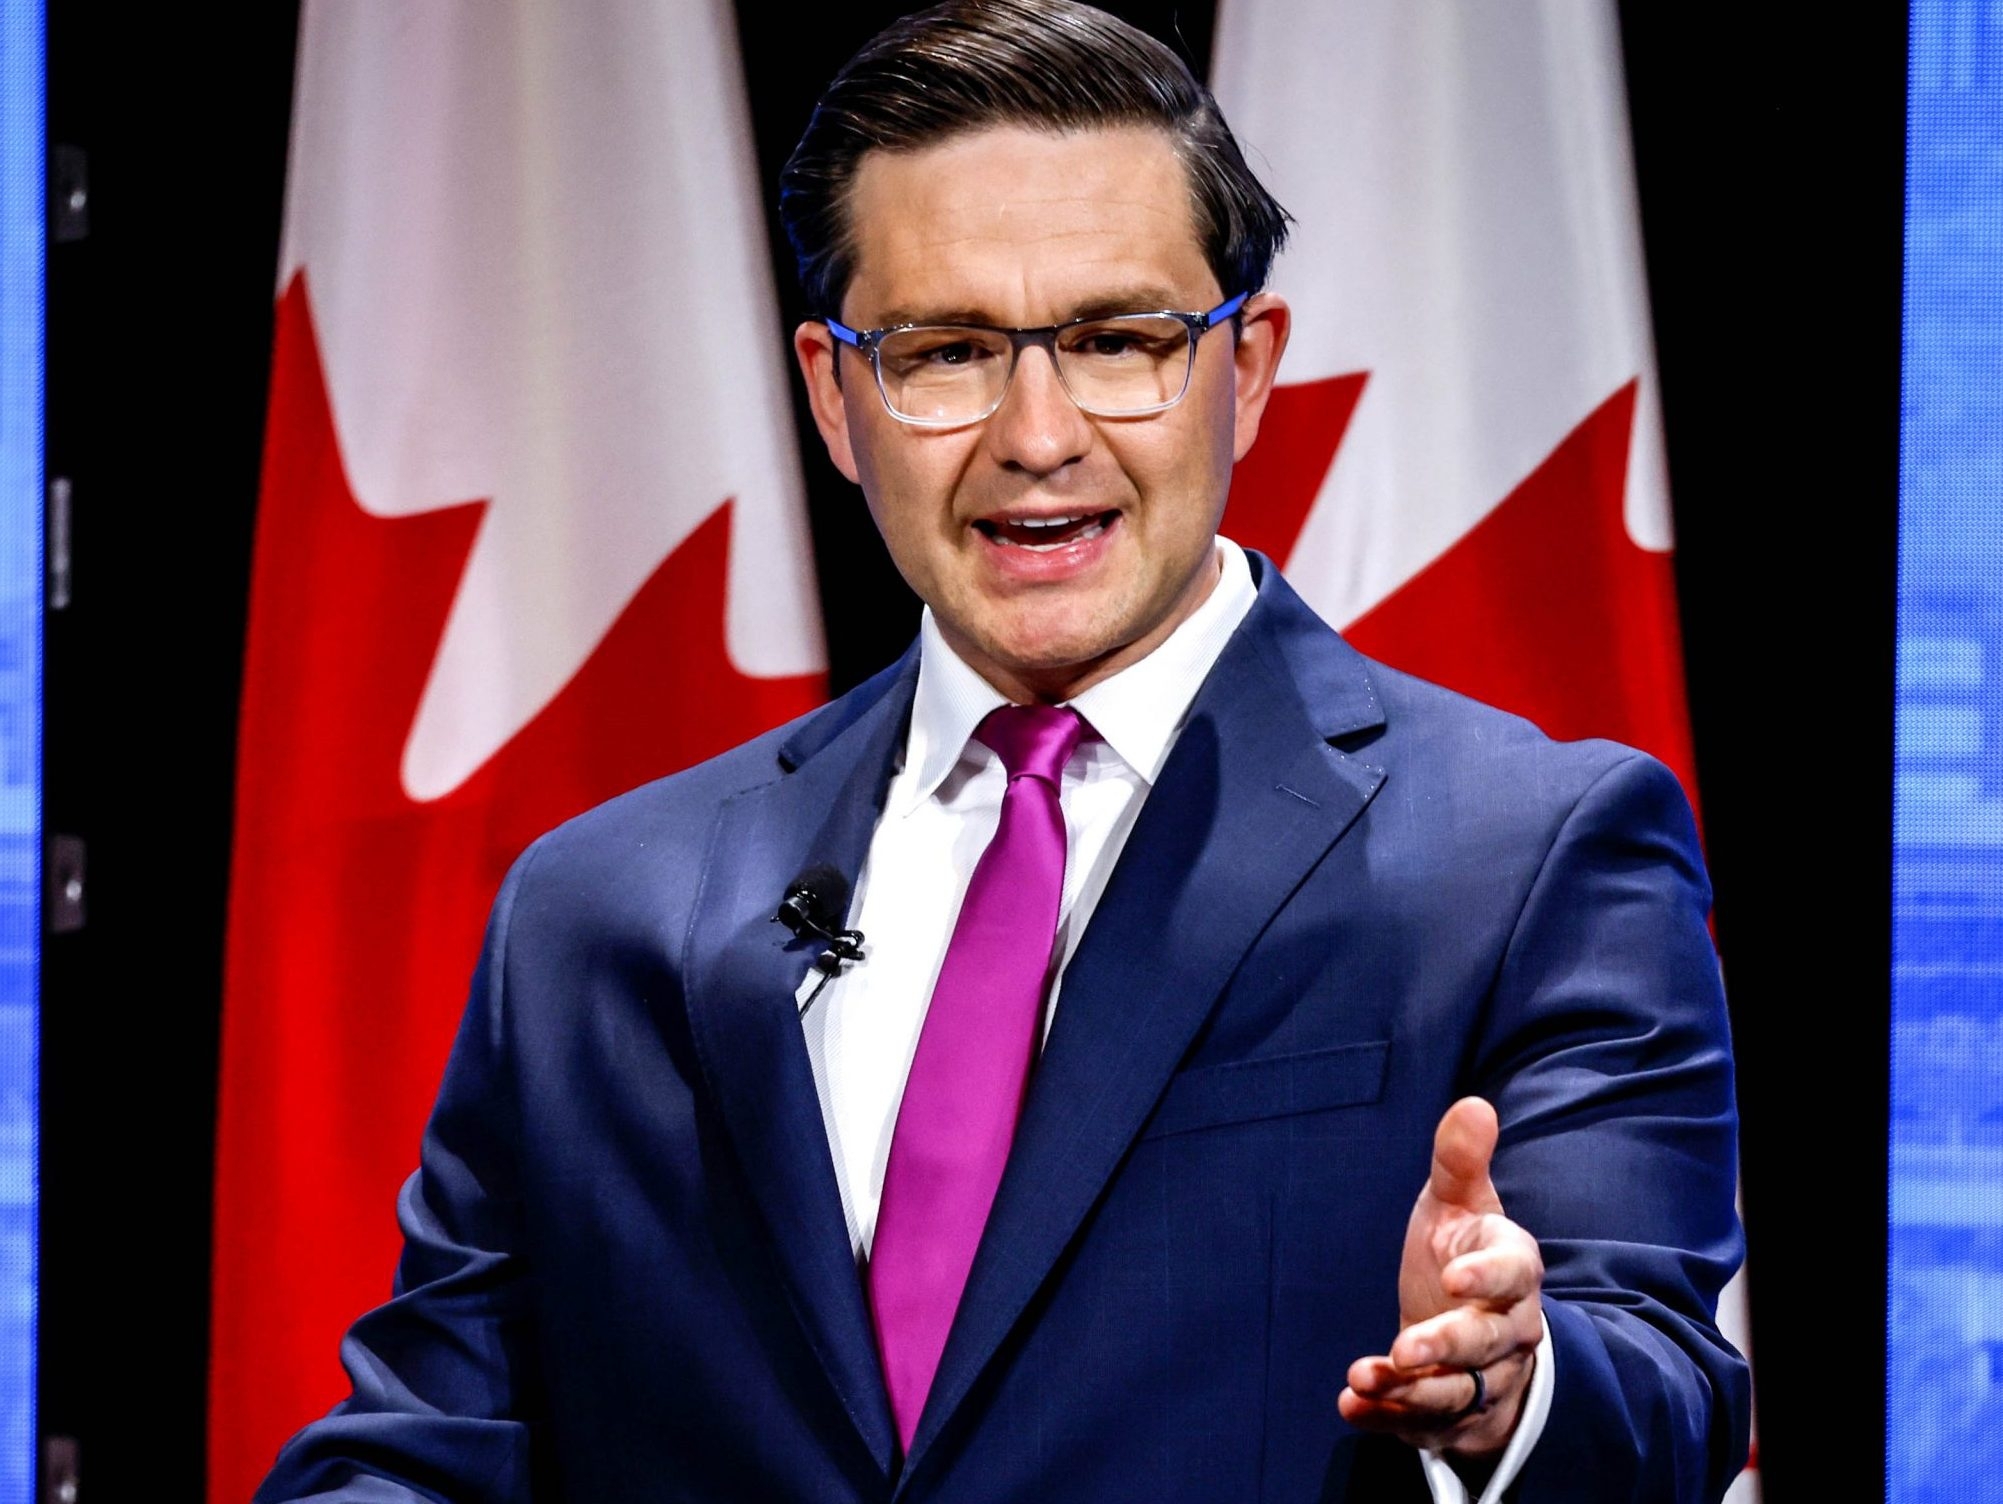 Letter to the editor: Poilievre poised to shake up federal politics